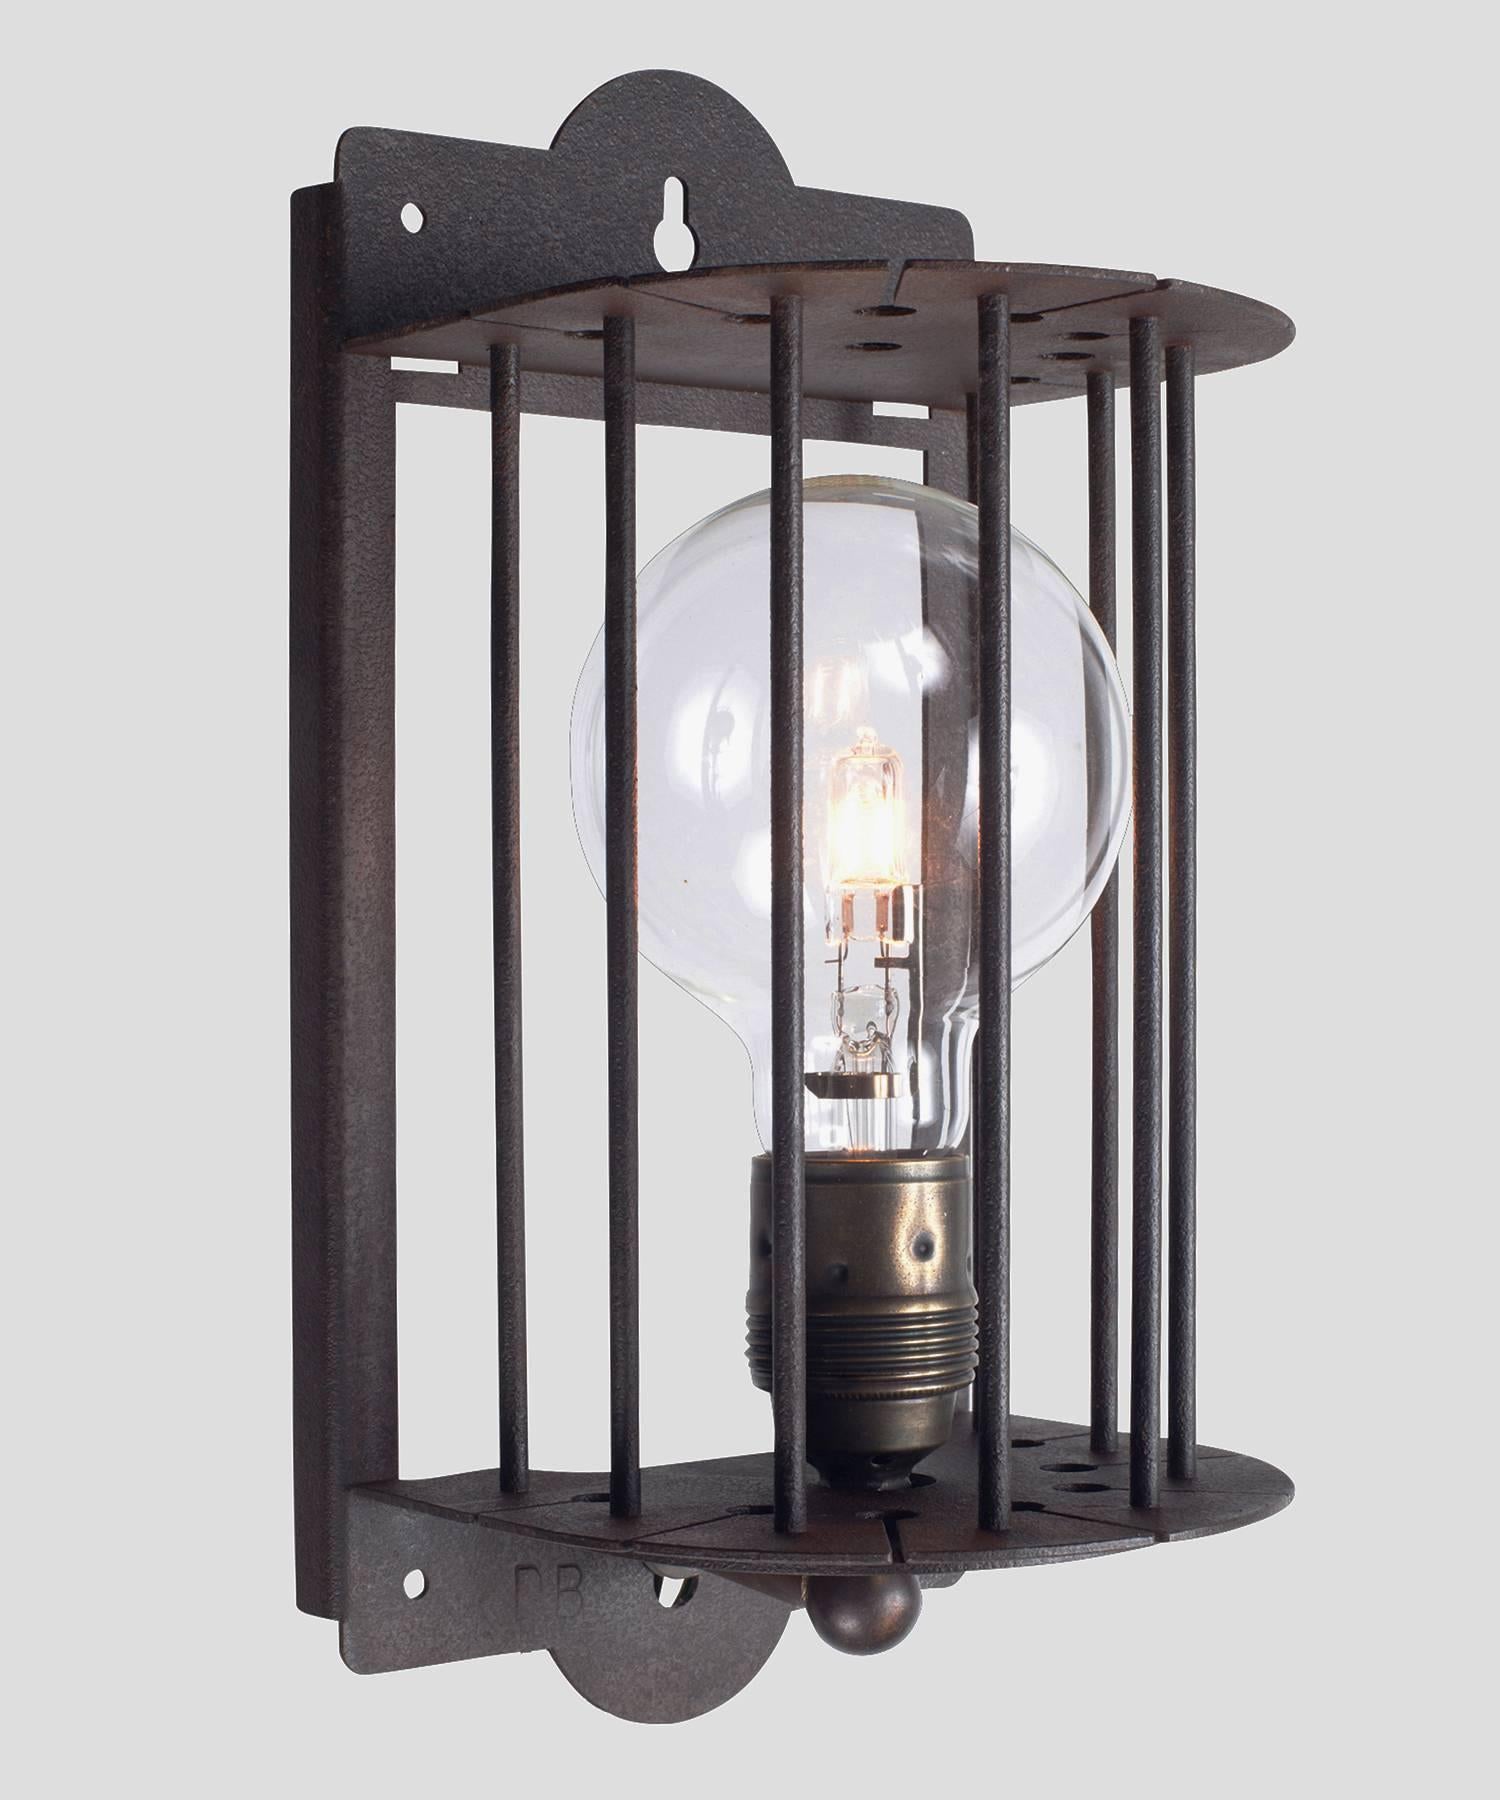 Caged Metal Sconce, Italy, 21st Century

Semicircular form with evenly placed decorative rods.

Italian industrial design with four-week lead time.